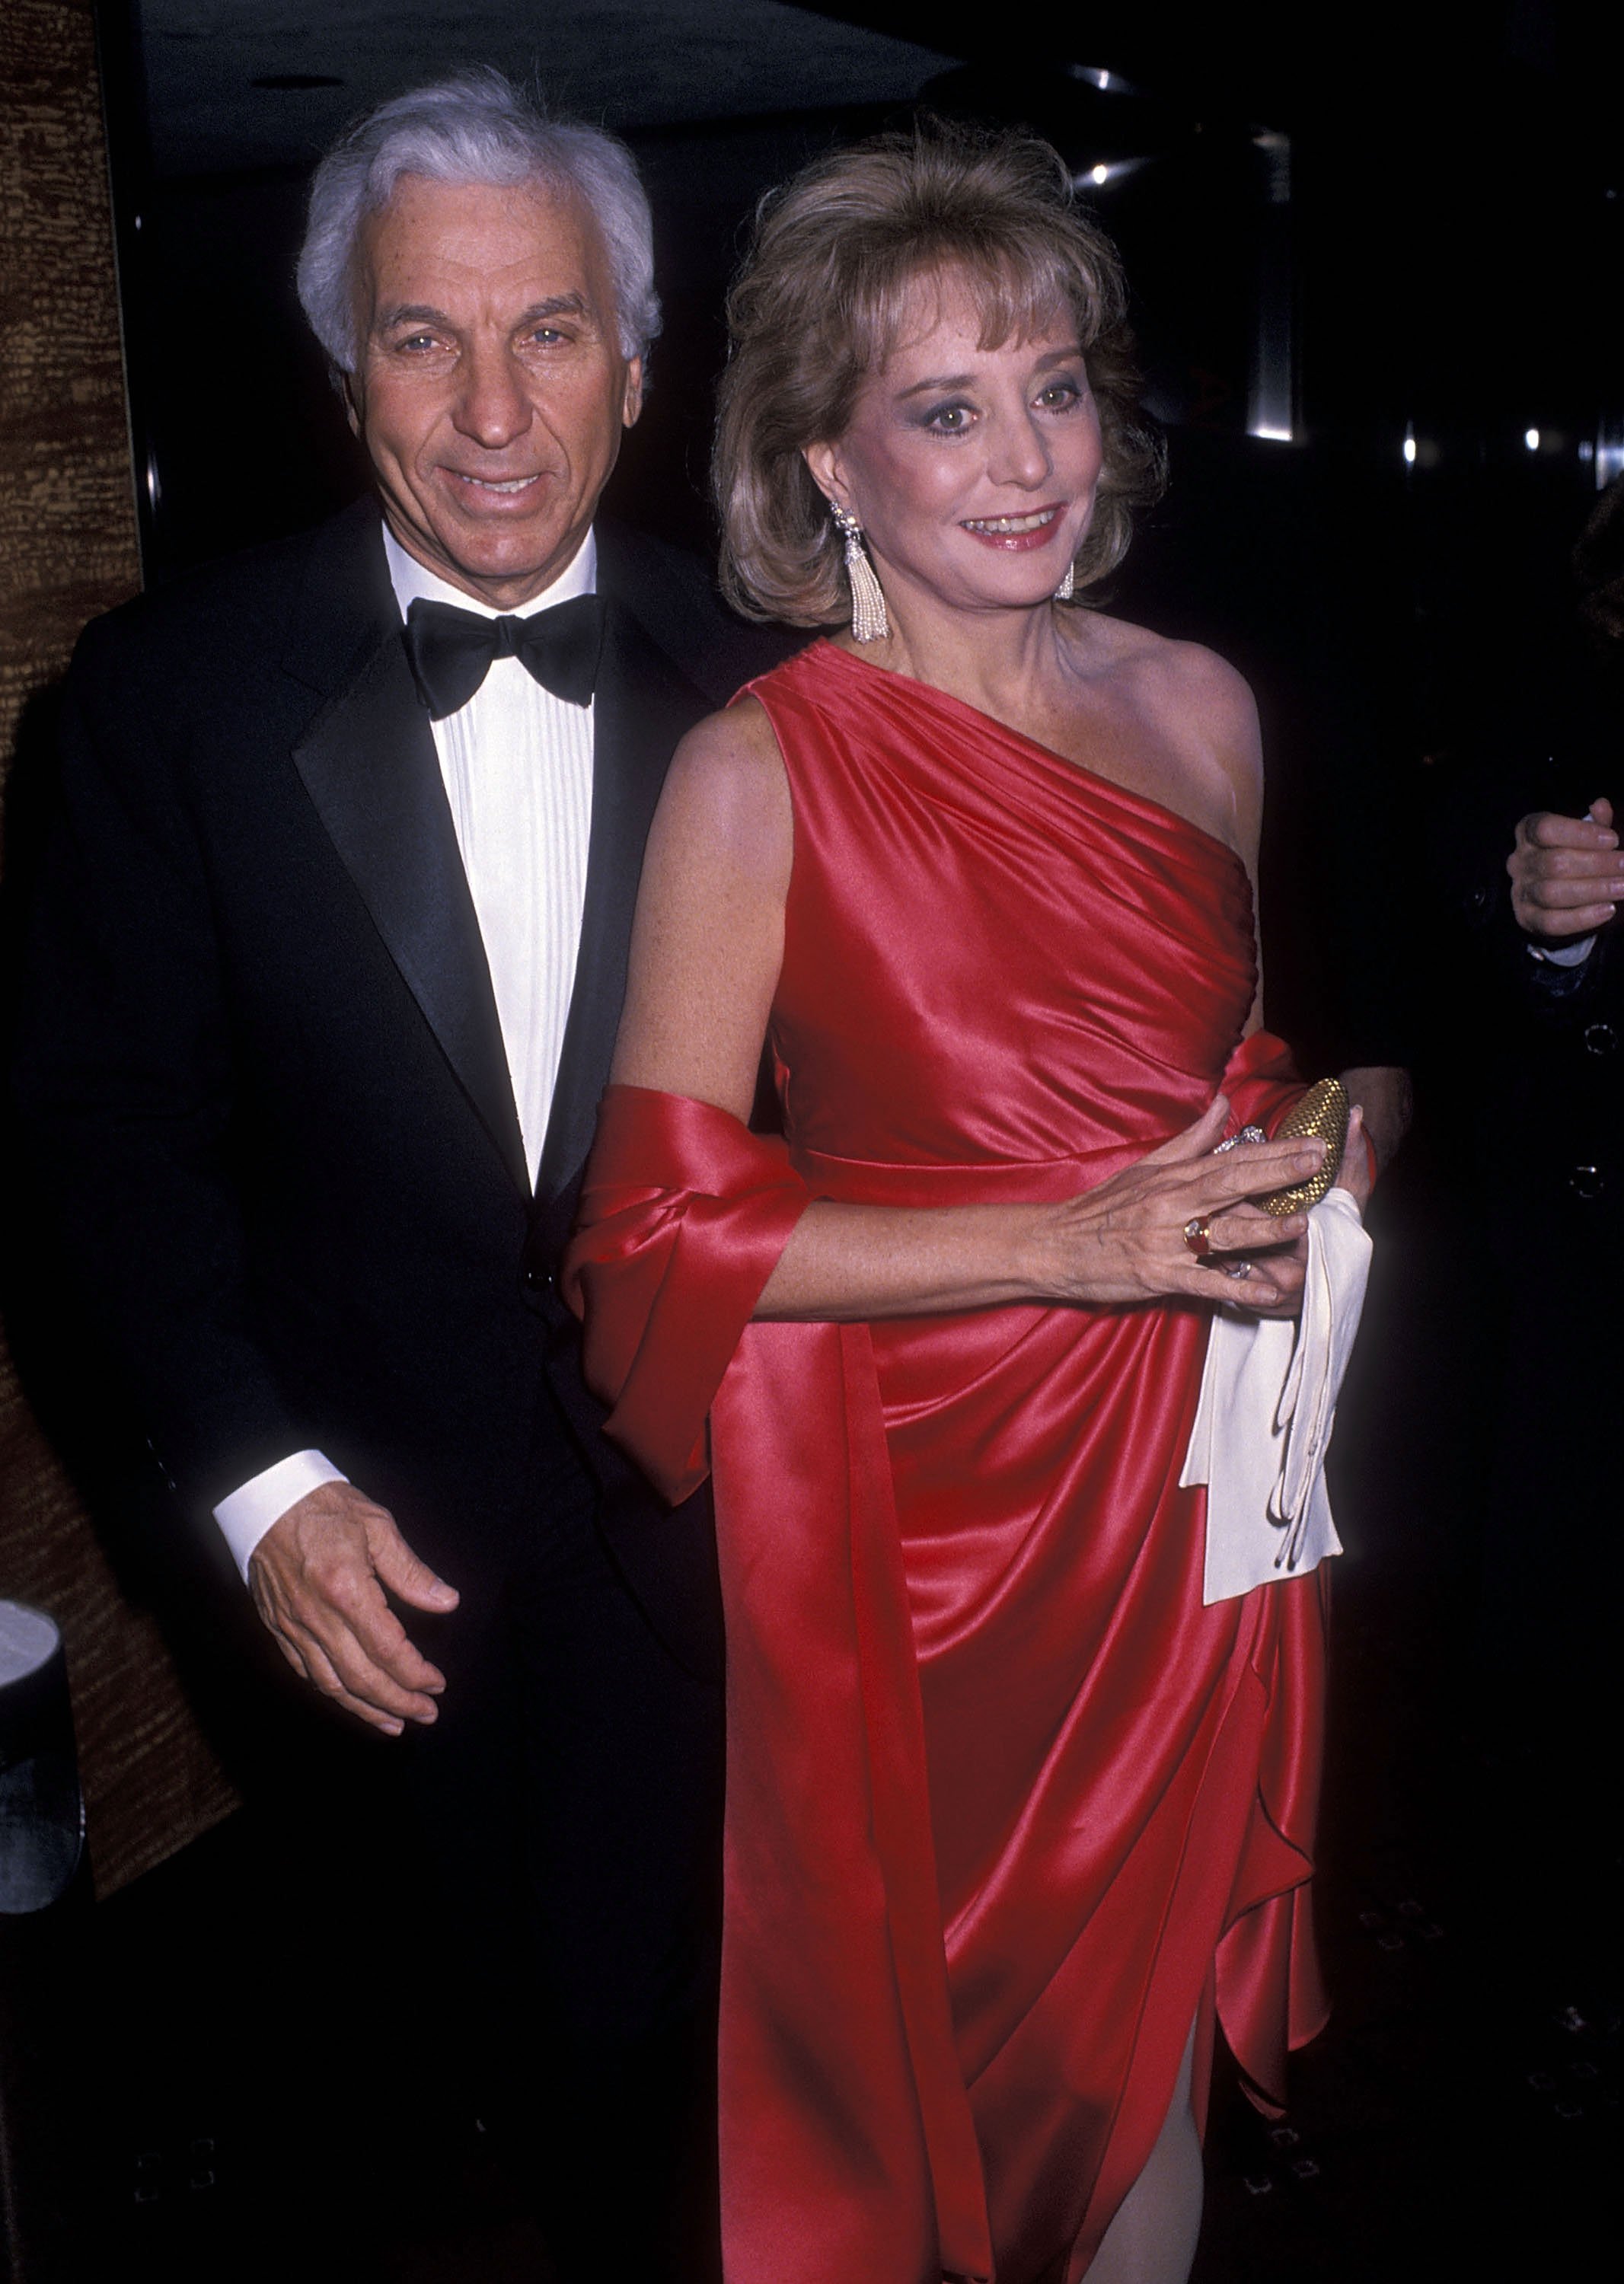 Barbara Walters Met 2nd Spouse While Still Wearing Ring from Rich Ex Who  Made Her Feel 'Trapped & Scared'